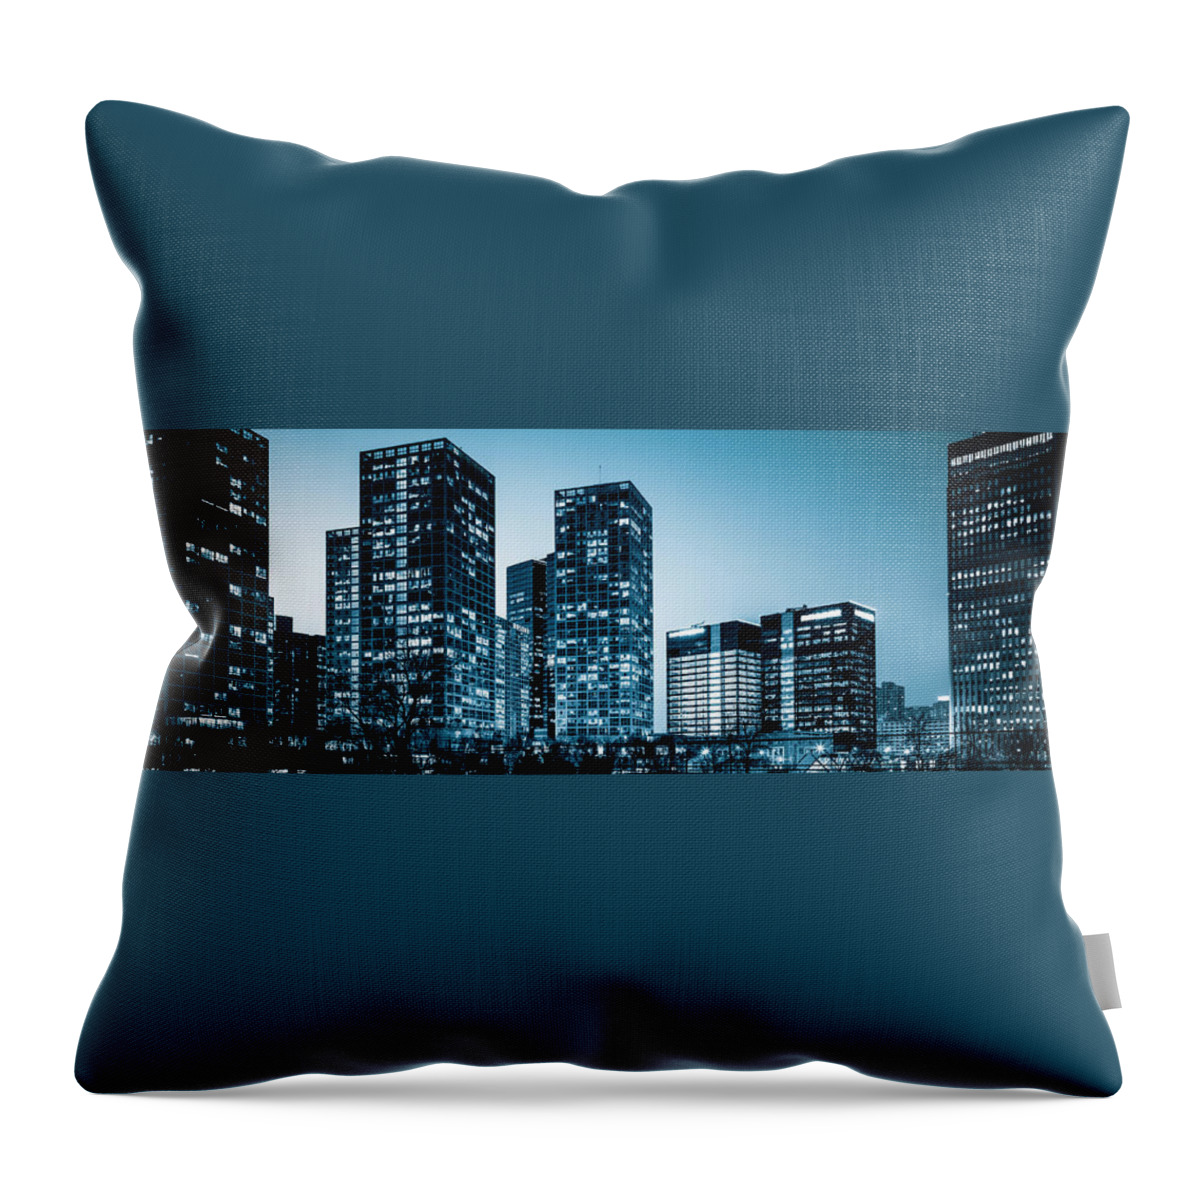 Scenics Throw Pillow featuring the photograph Skyline At Beijing China by Chinaface